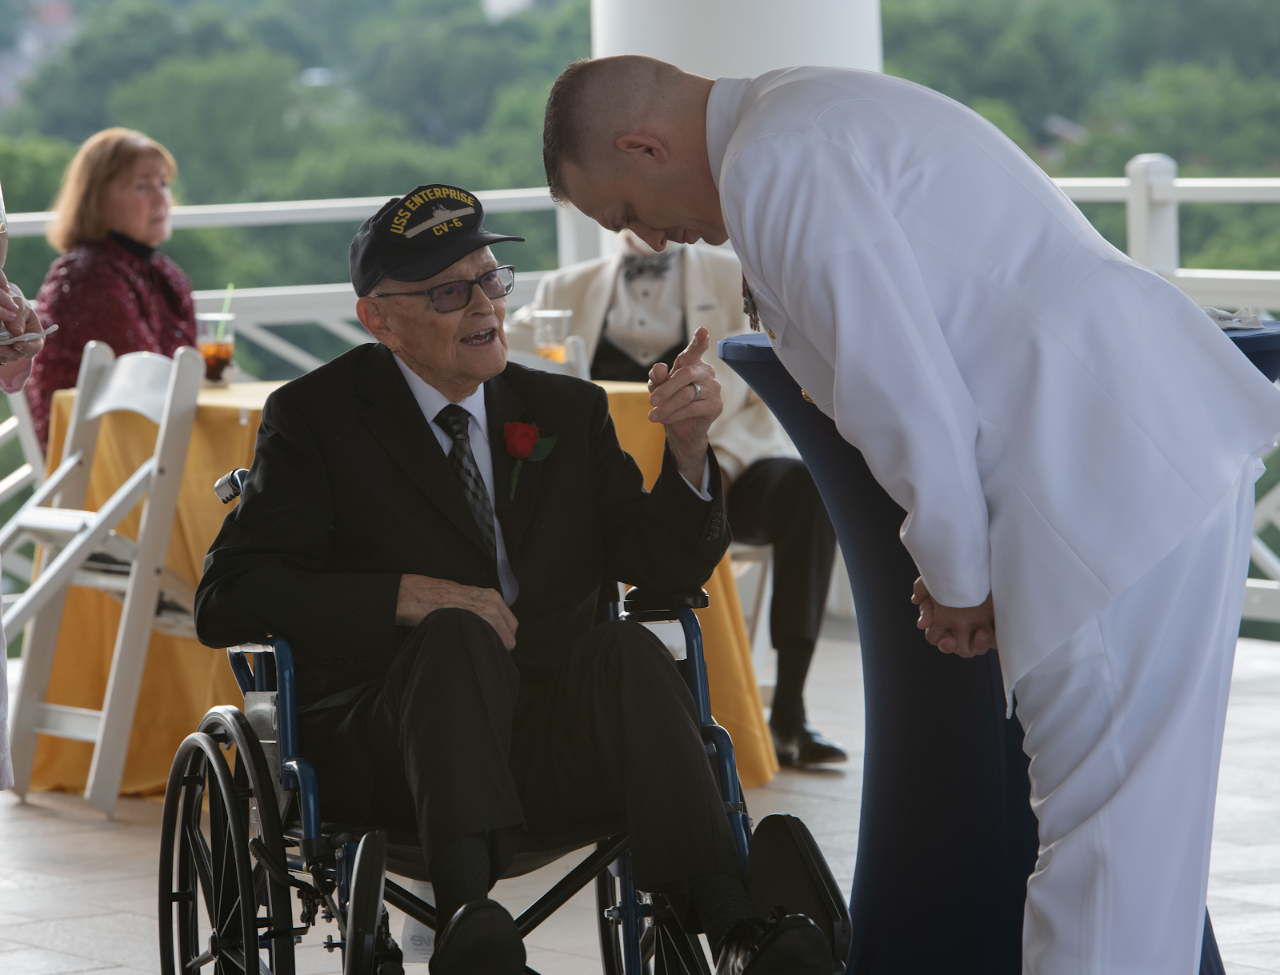 Chief Petty Officer Bill Norberg, a World War II veteran who served during the Battle of Midway, during a commemoration dinner at the Army Navy Country Club in Arlington, Va., June 4.